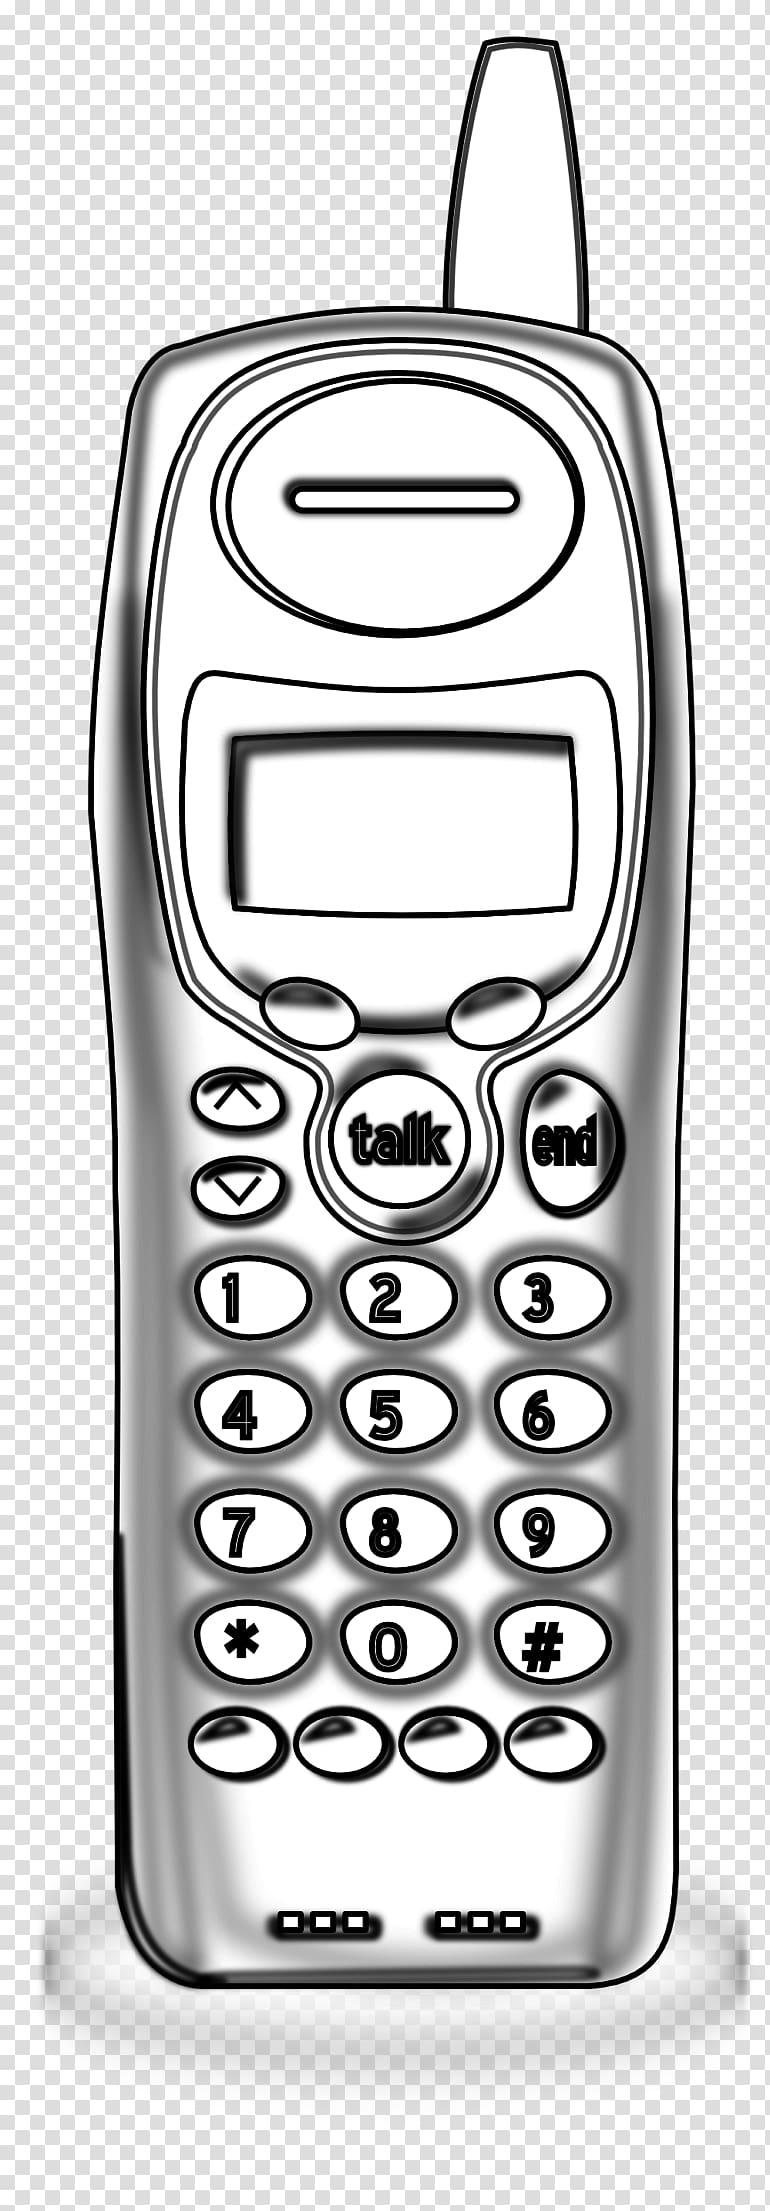 Coloring book Cordless telephone Chatter Telephone iPhone, Cell Phone Cartoon transparent background PNG clipart